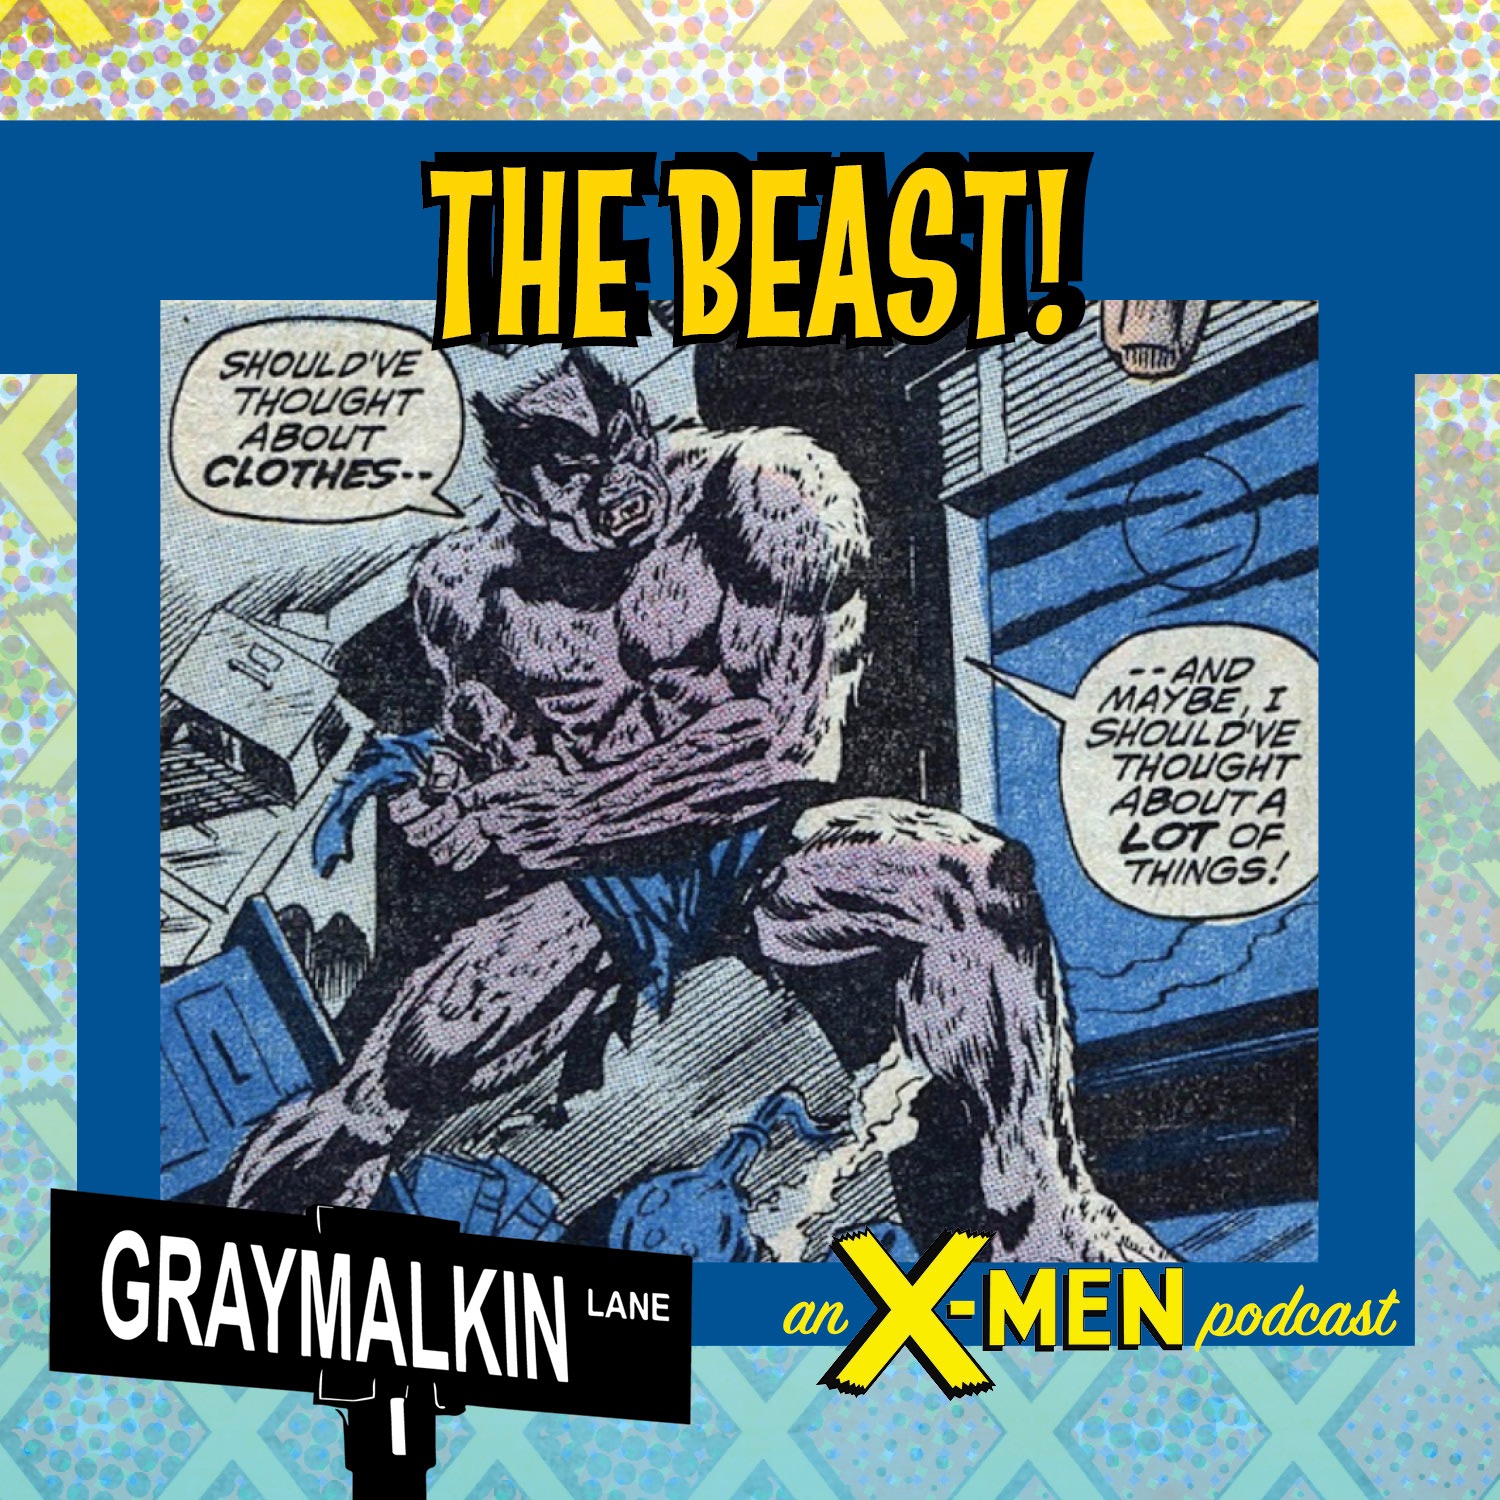 Amazing Adventures 11: the Beast! Featuring Spencer Ackerman and Jordan White! And a script reading of X-Men Unlimited #1!